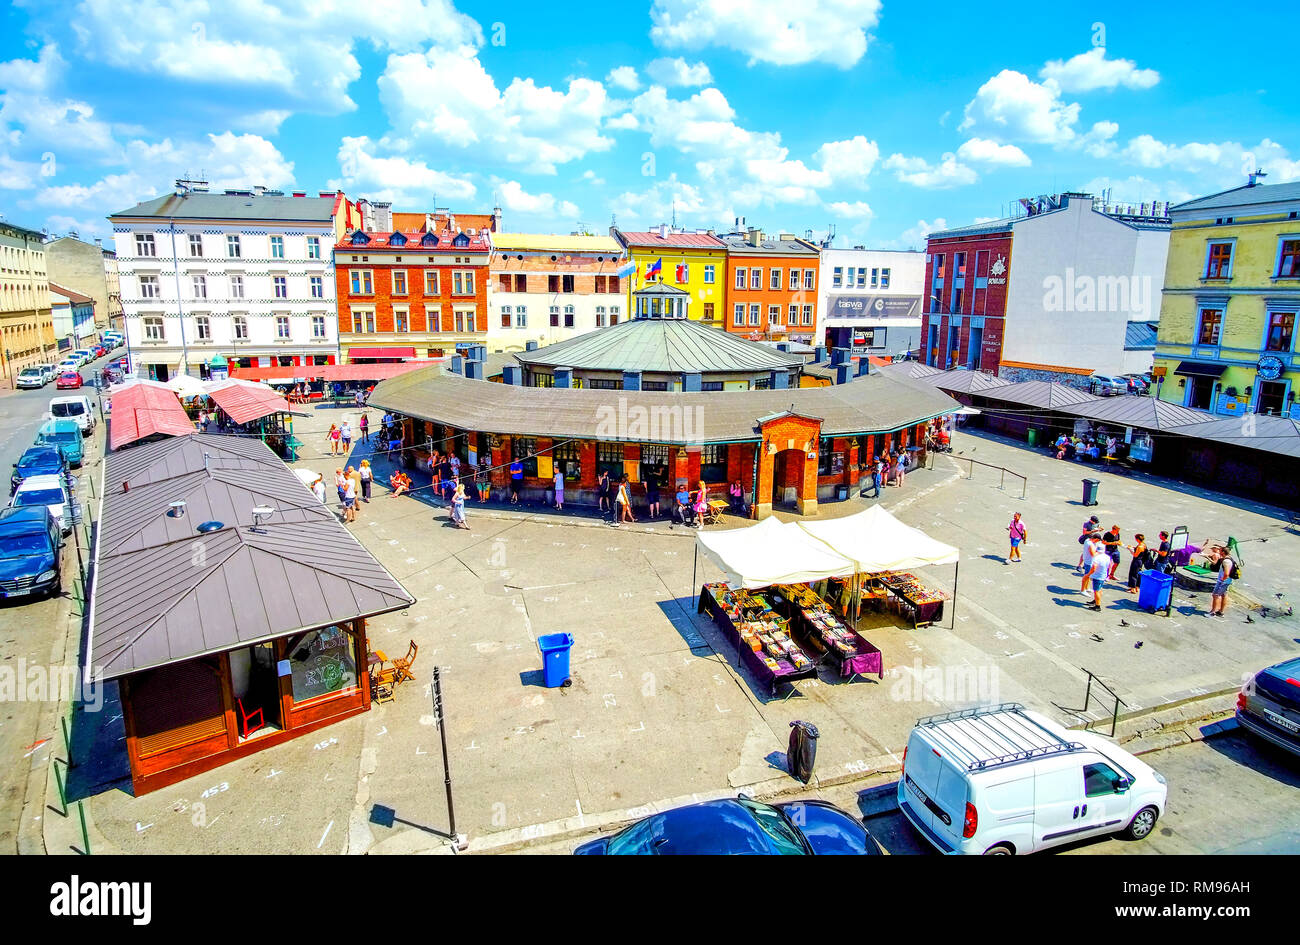 KRAKOW, POLAND - JUNE 21, 2018: The view on flea market stalls of New Square (Plac Nowy), located in Kazimierz Jewish Quarter with historical mansions Stock Photo